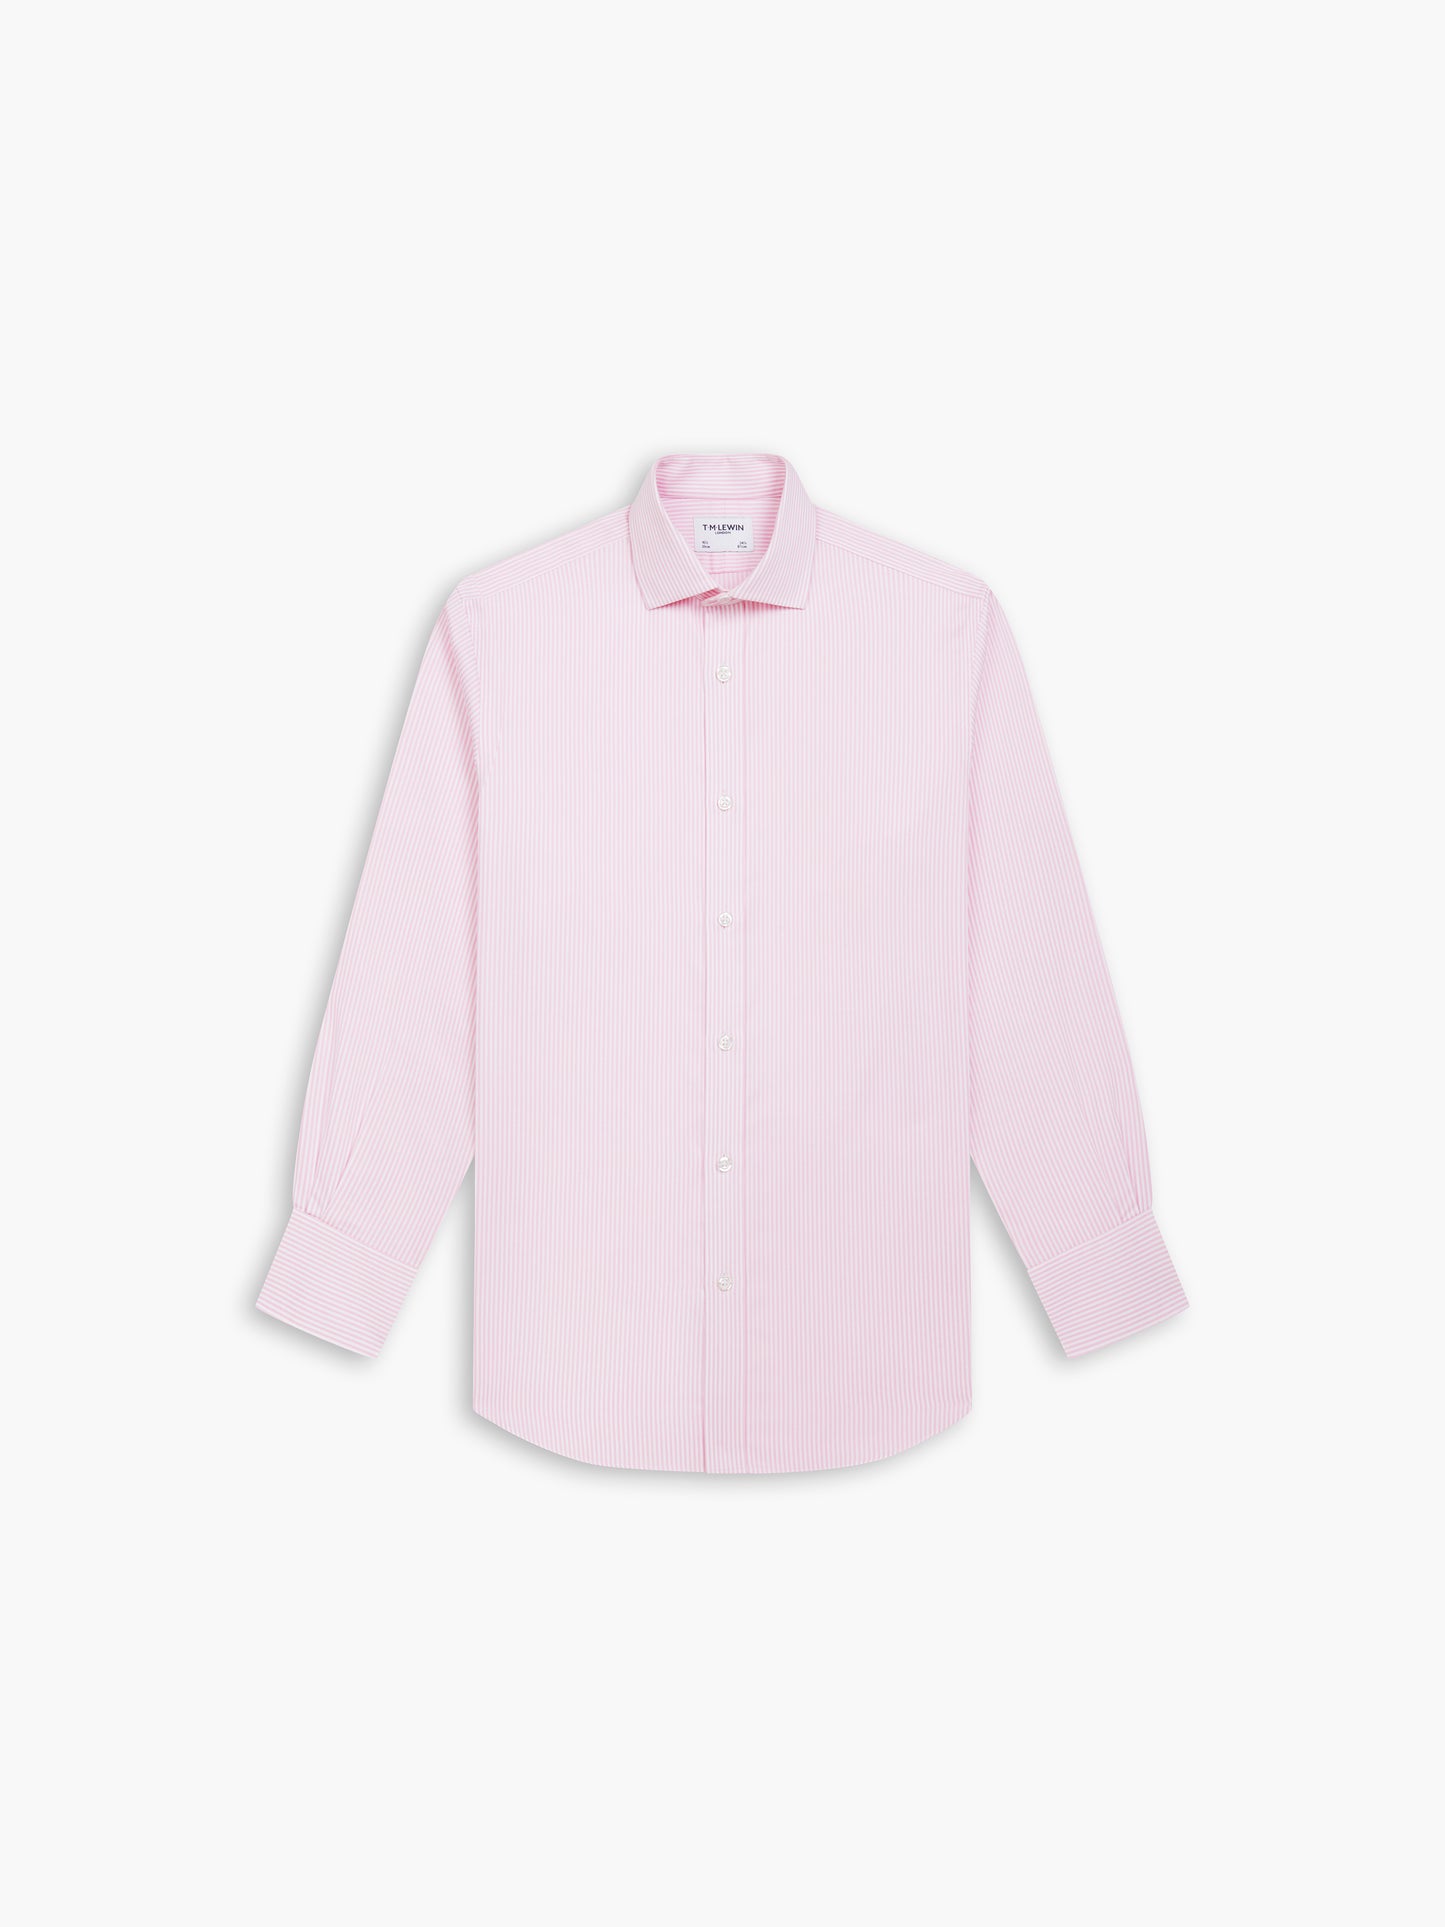 Non-Iron Pink Bengal Stripe Twill Fitted Single Cuff Classic Collar Shirt